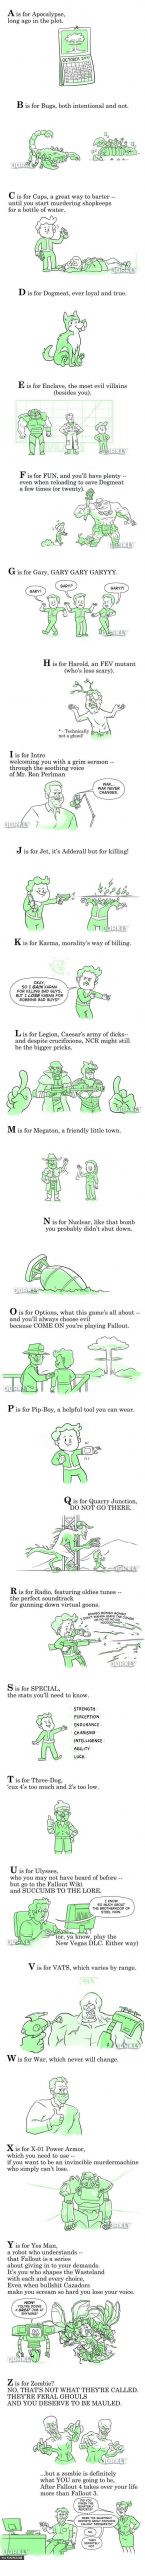 The ABCs of Fallout